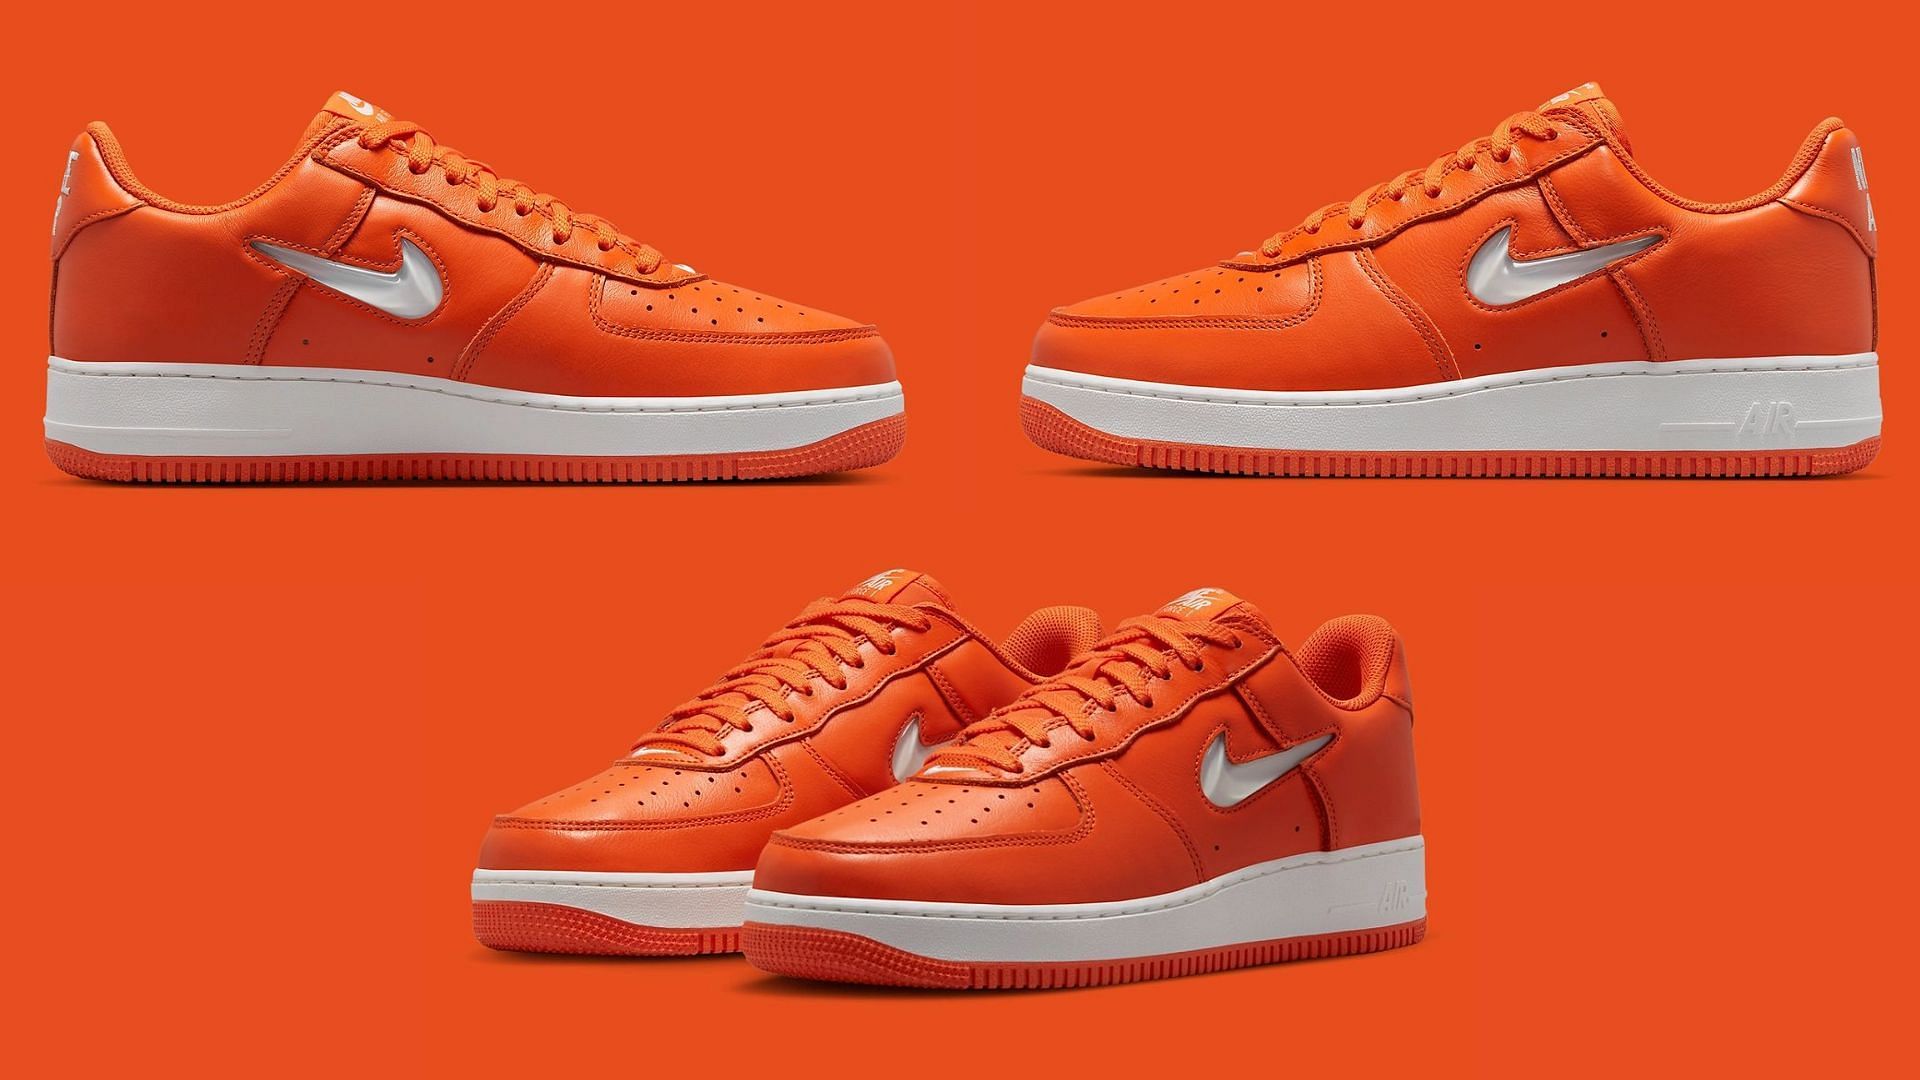 Nike air force orange • Compare & see prices now »